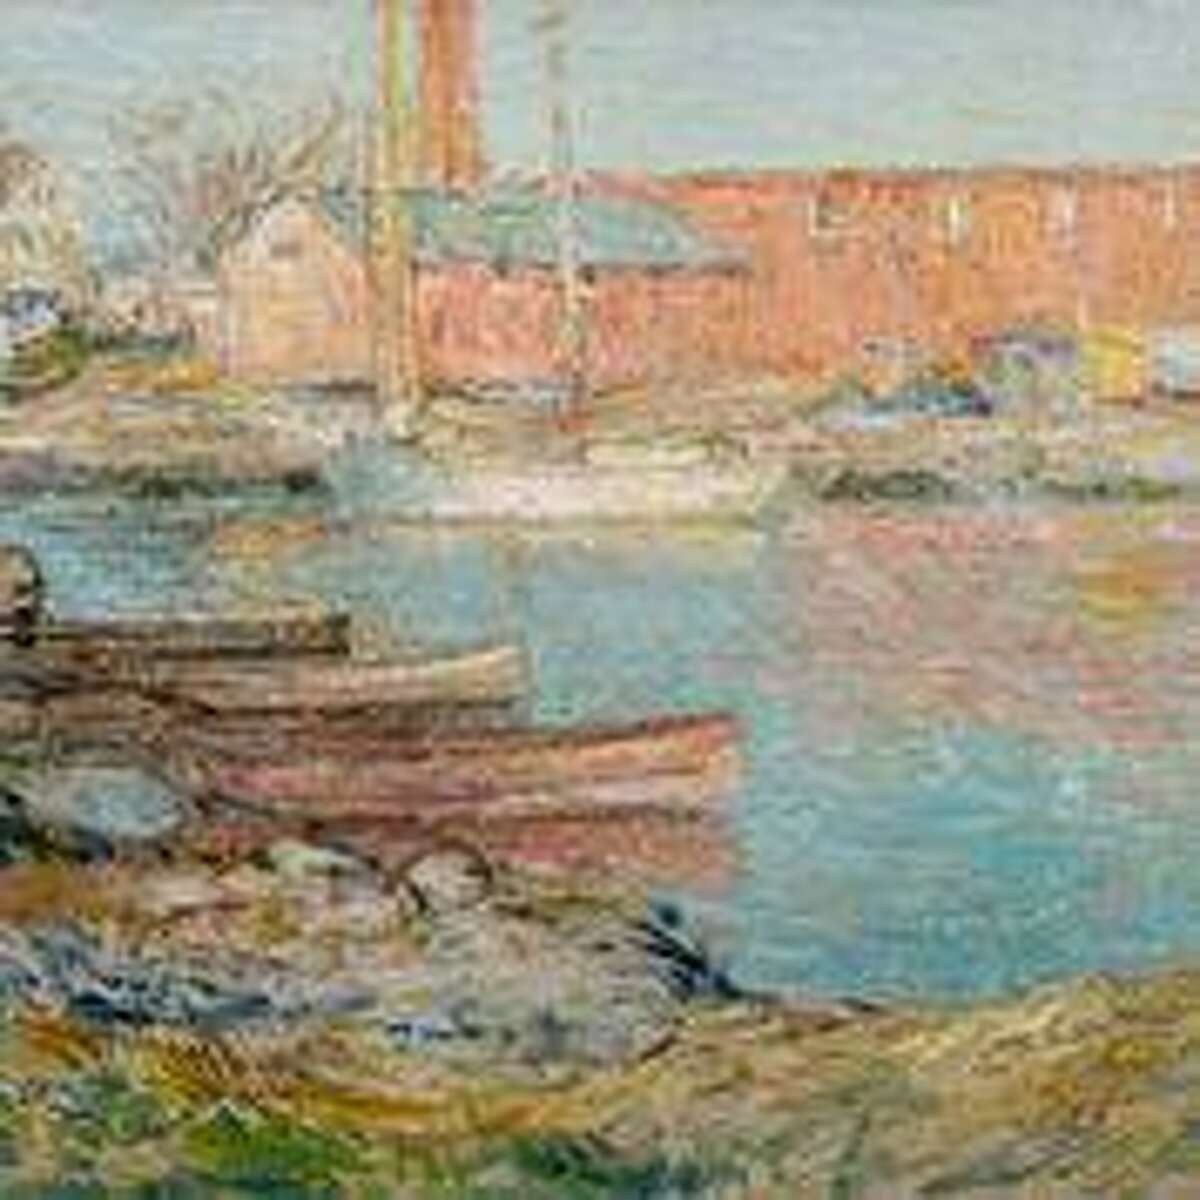 Childe Hassam’s “The Red Mill,” (Cos Cob, 1896, Oil on canvas) was recently purchased by the Greenwich Historical Society with funds from Susan and Jim Larkin, Sally and Larry Lawrence, Mr. and Mrs. Peter L. Malkin, Debbie and Russ Reynolds, Reba and Dave Williams, and Lily Downing and David Yudain.